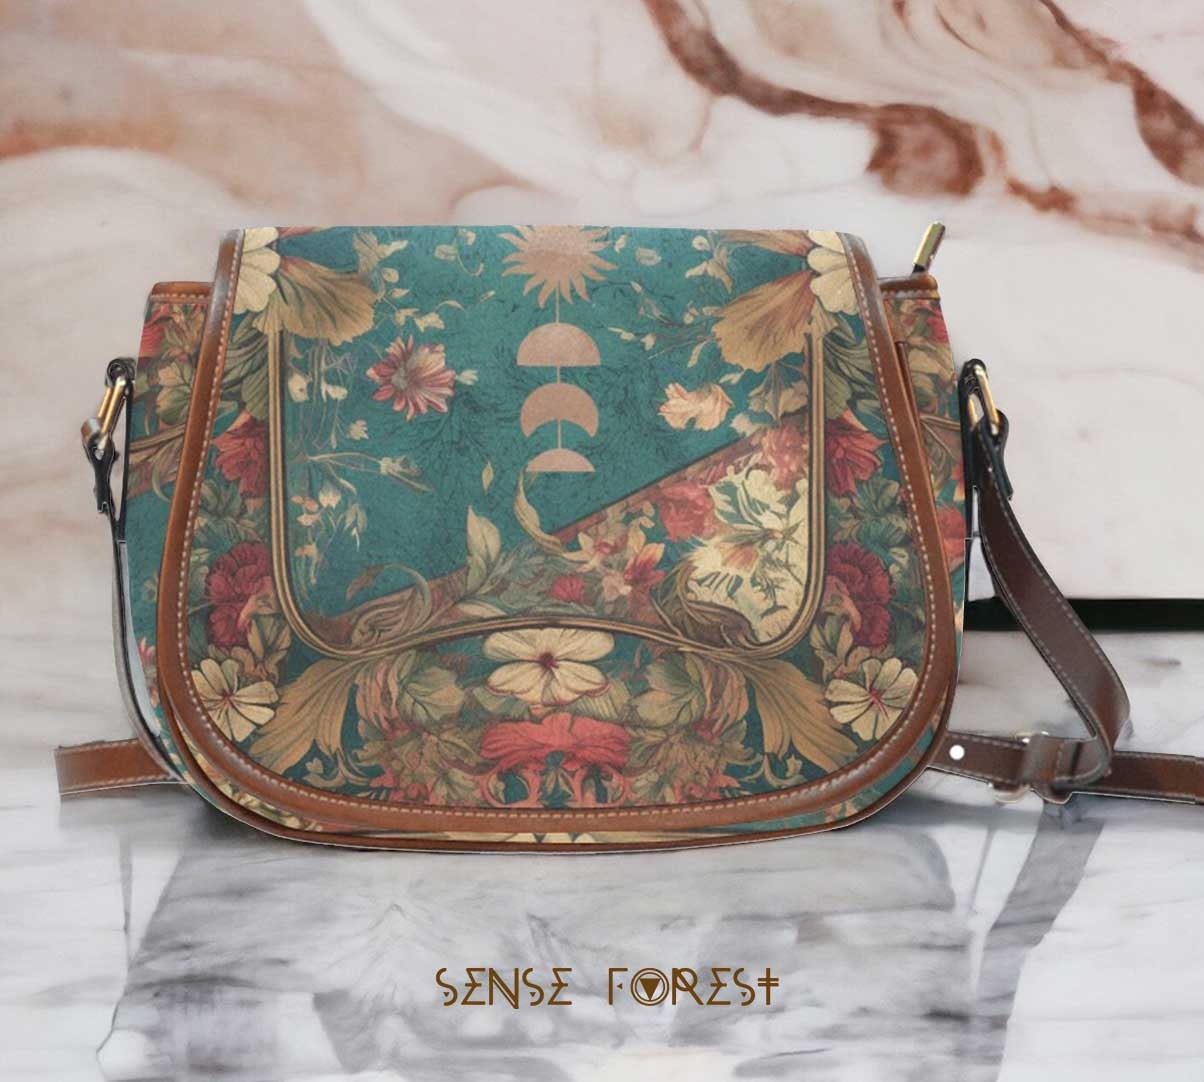 Retro Fashion Shoulder Bag Solid Color Women Crossbody Bag PU Leather  Handbags Lingge Embroidery Females Chain Small Square Bag